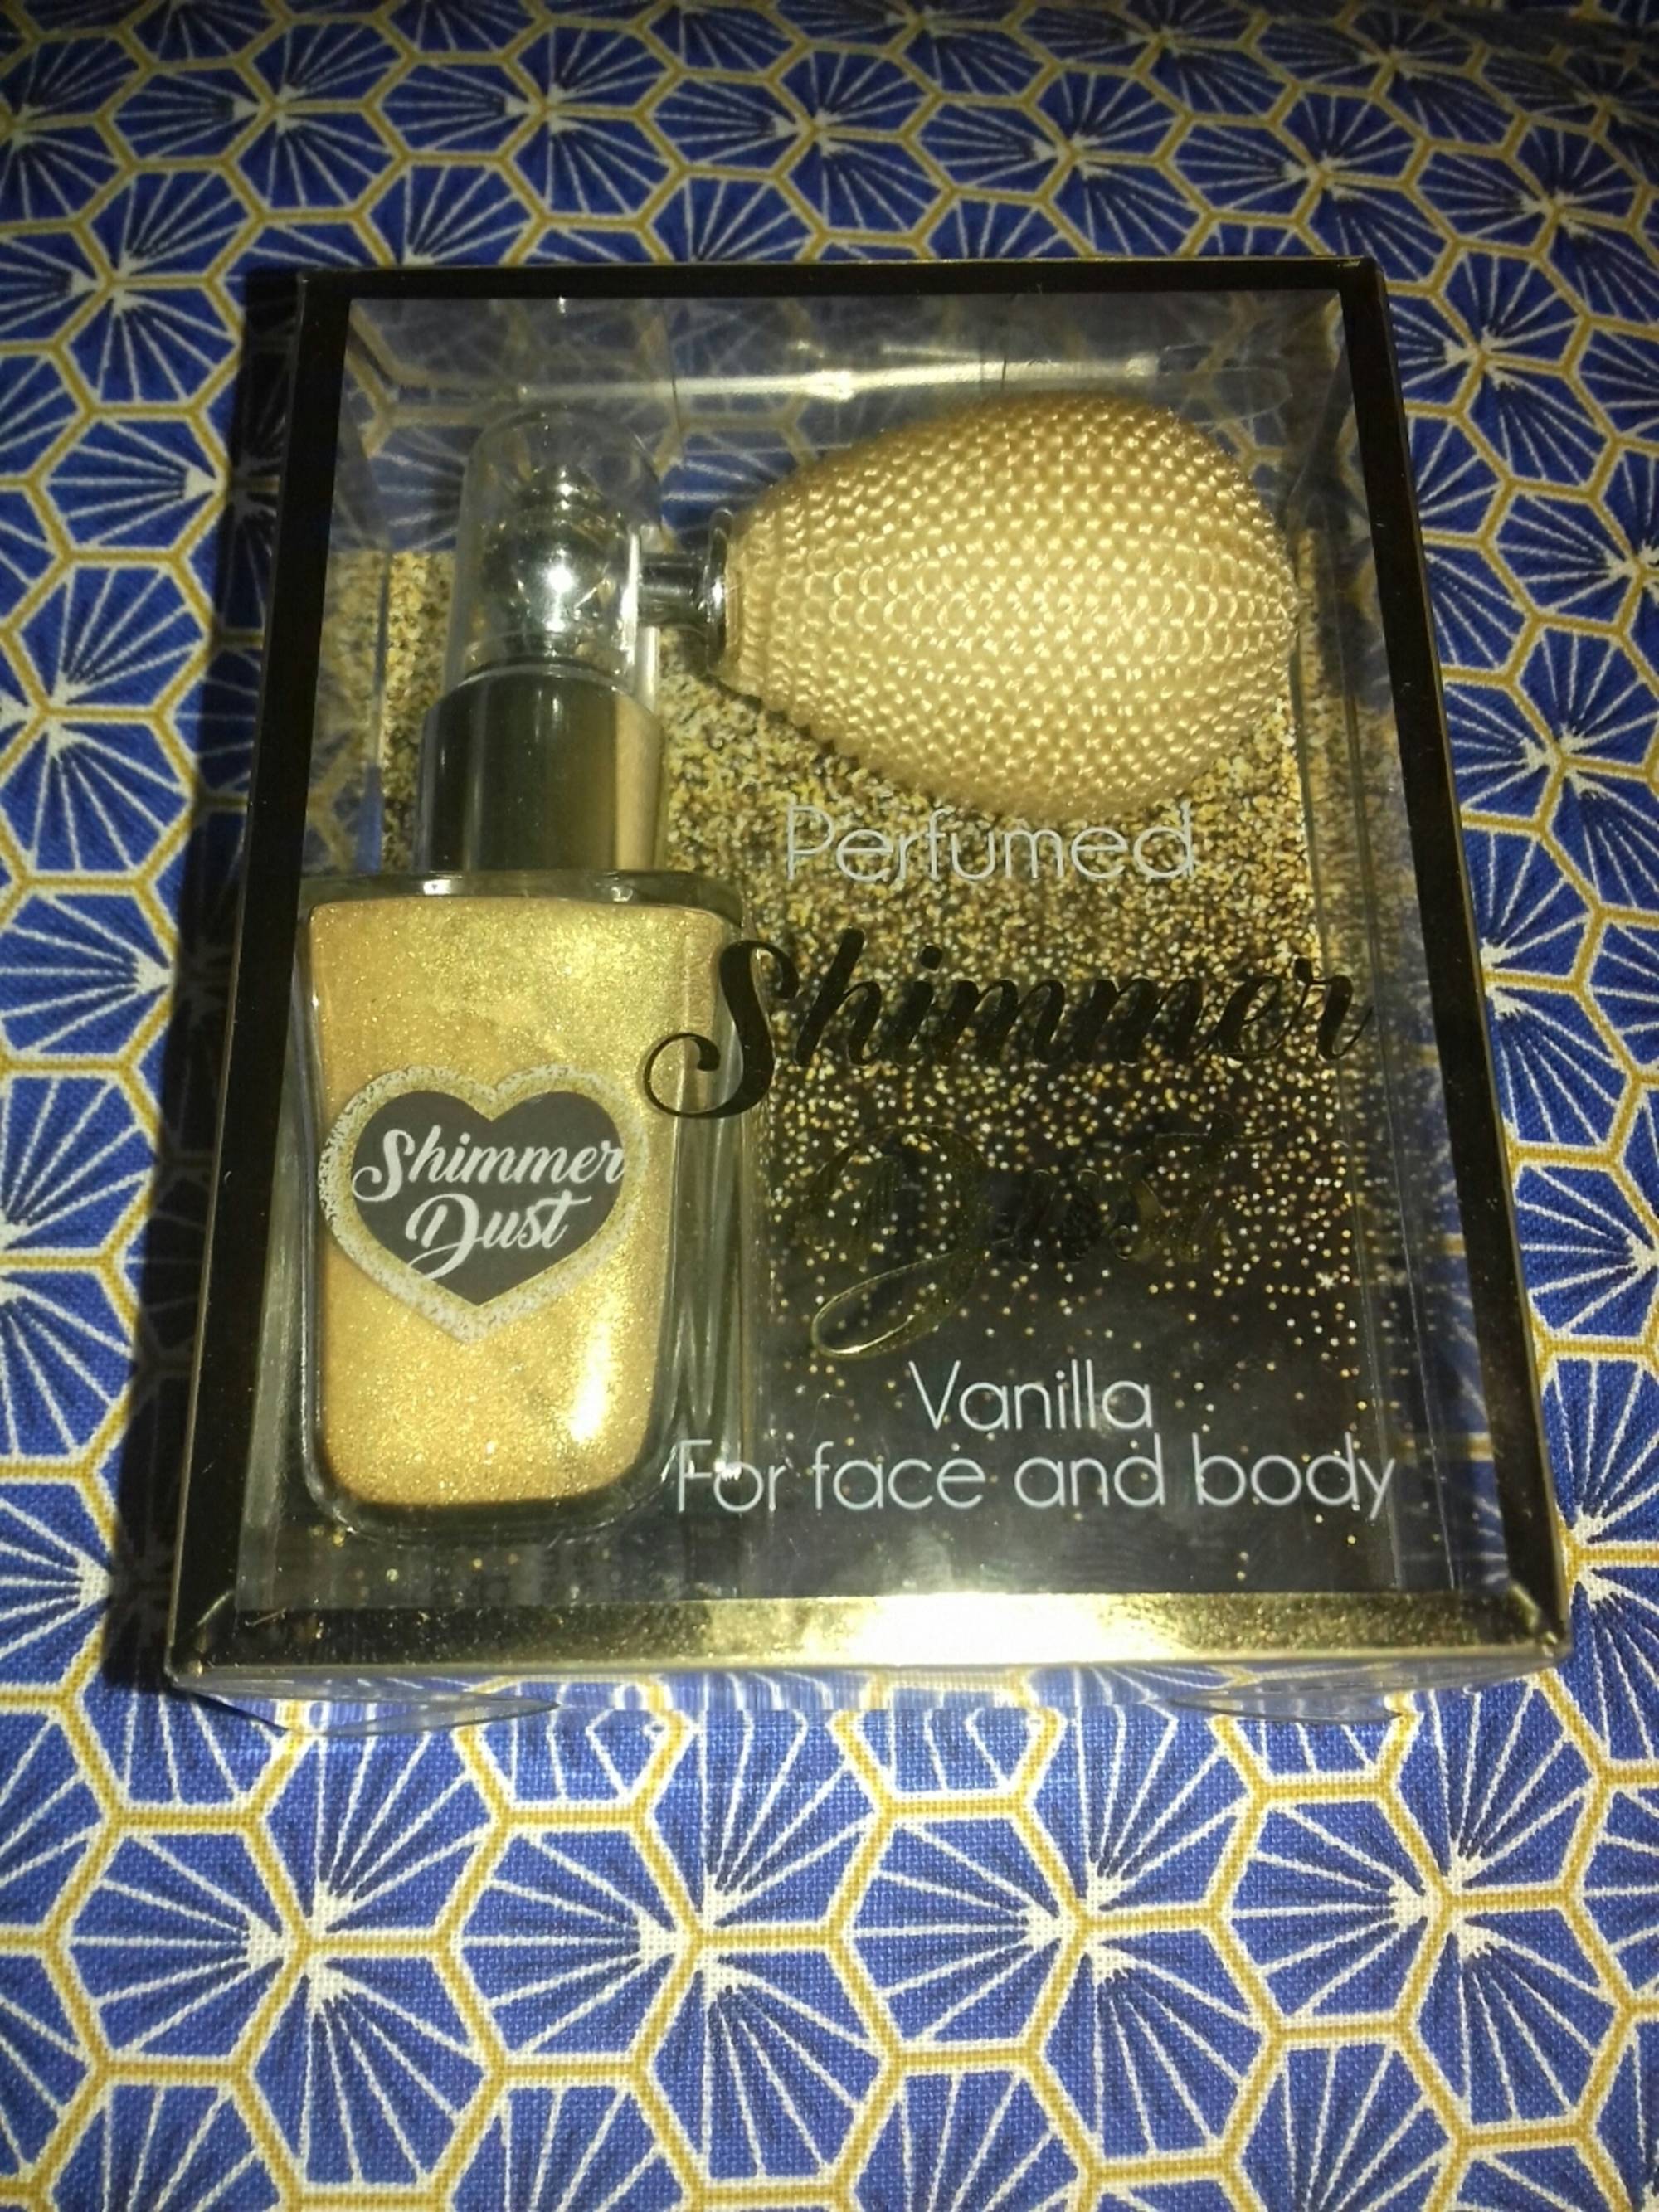 MAXBRANDS - Perfumed shimmer dust vanilla for face and body